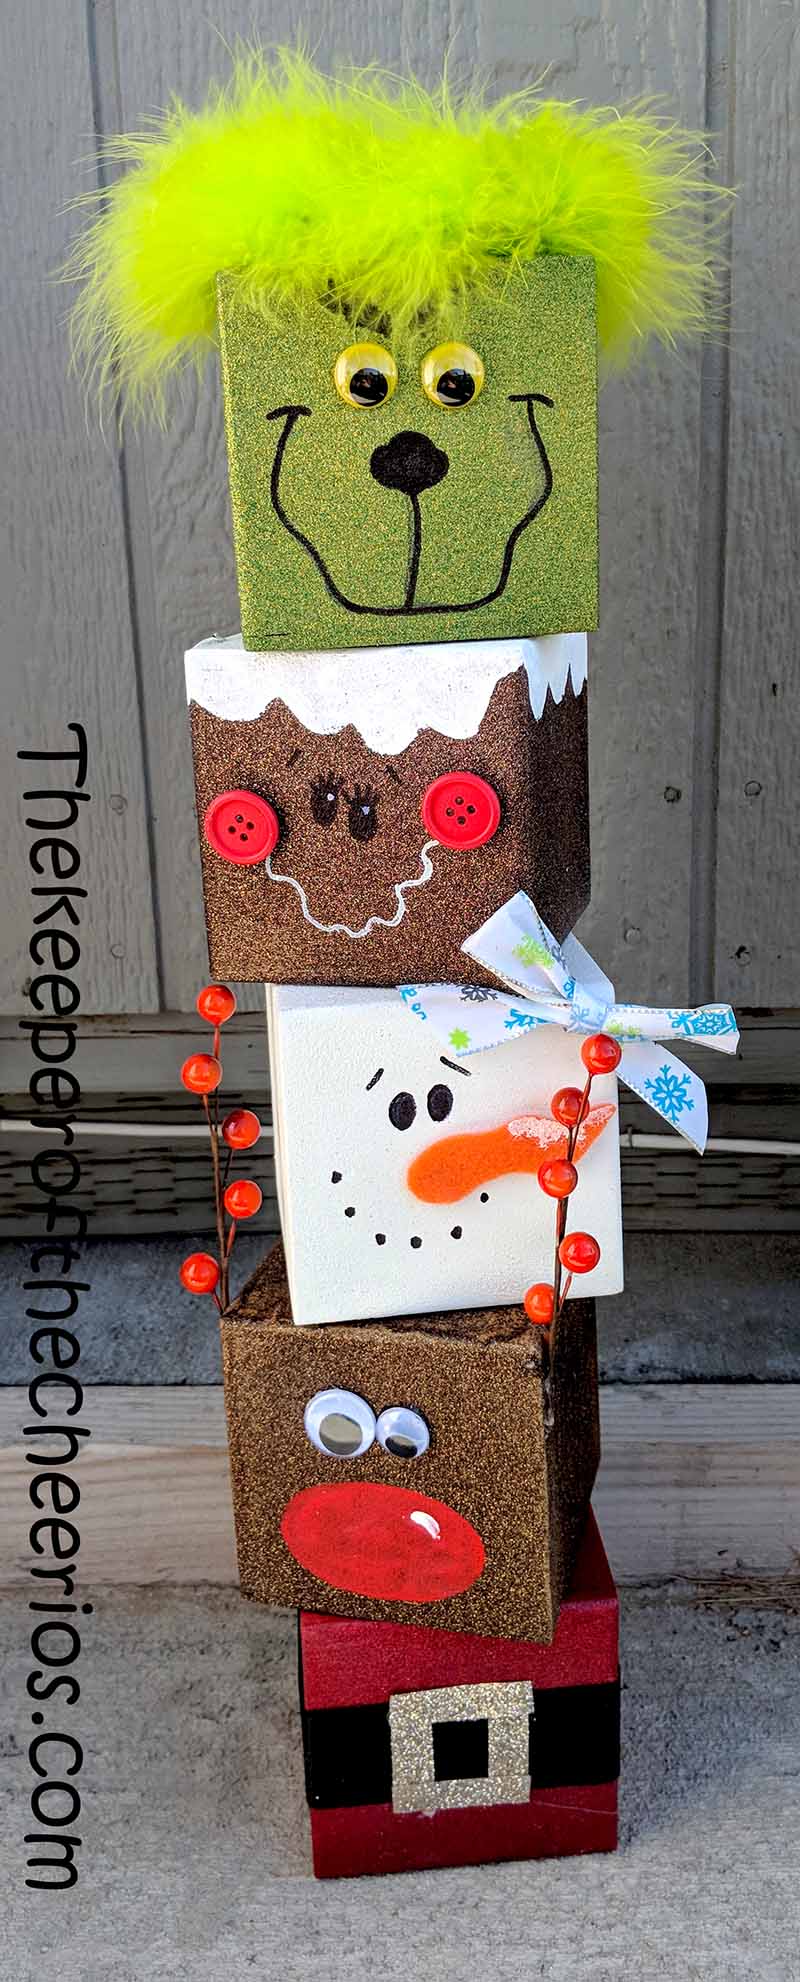 Christmas Craft Blocks - The Keeper of the Cheerios